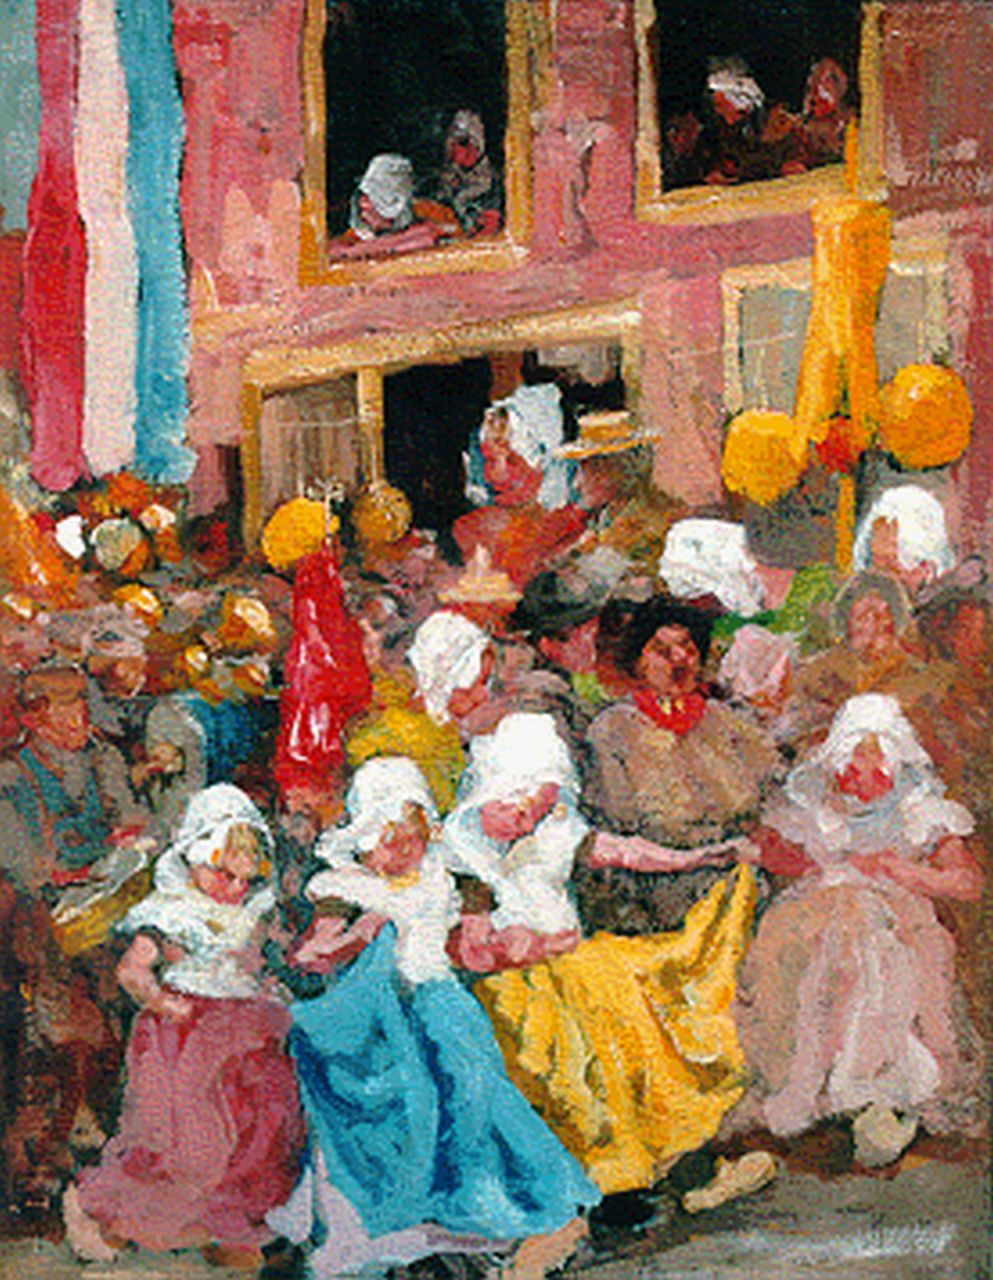 Hijner A.  | Arend Hijner, Coronation day, Zeeland, oil on canvas 43.5 x 32.8 cm, signed l.r. and dated '[?]8